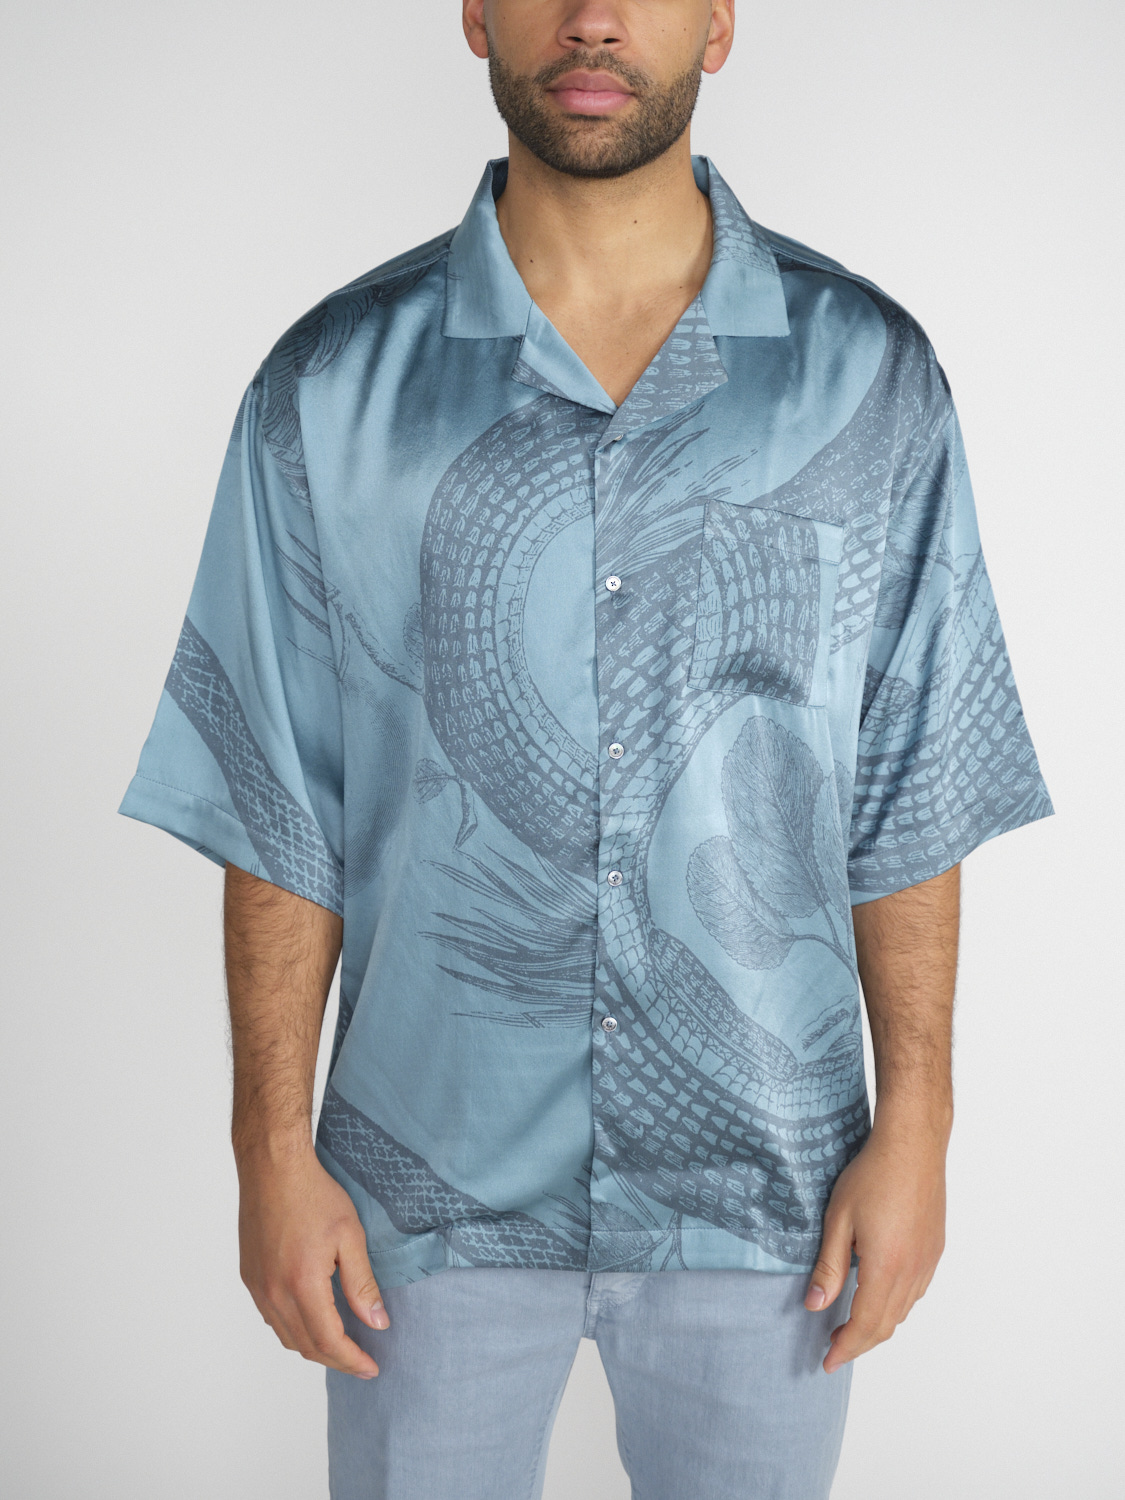 friendly hunting Chemise Grow – silk shirt with a heavenly pattern  mint L